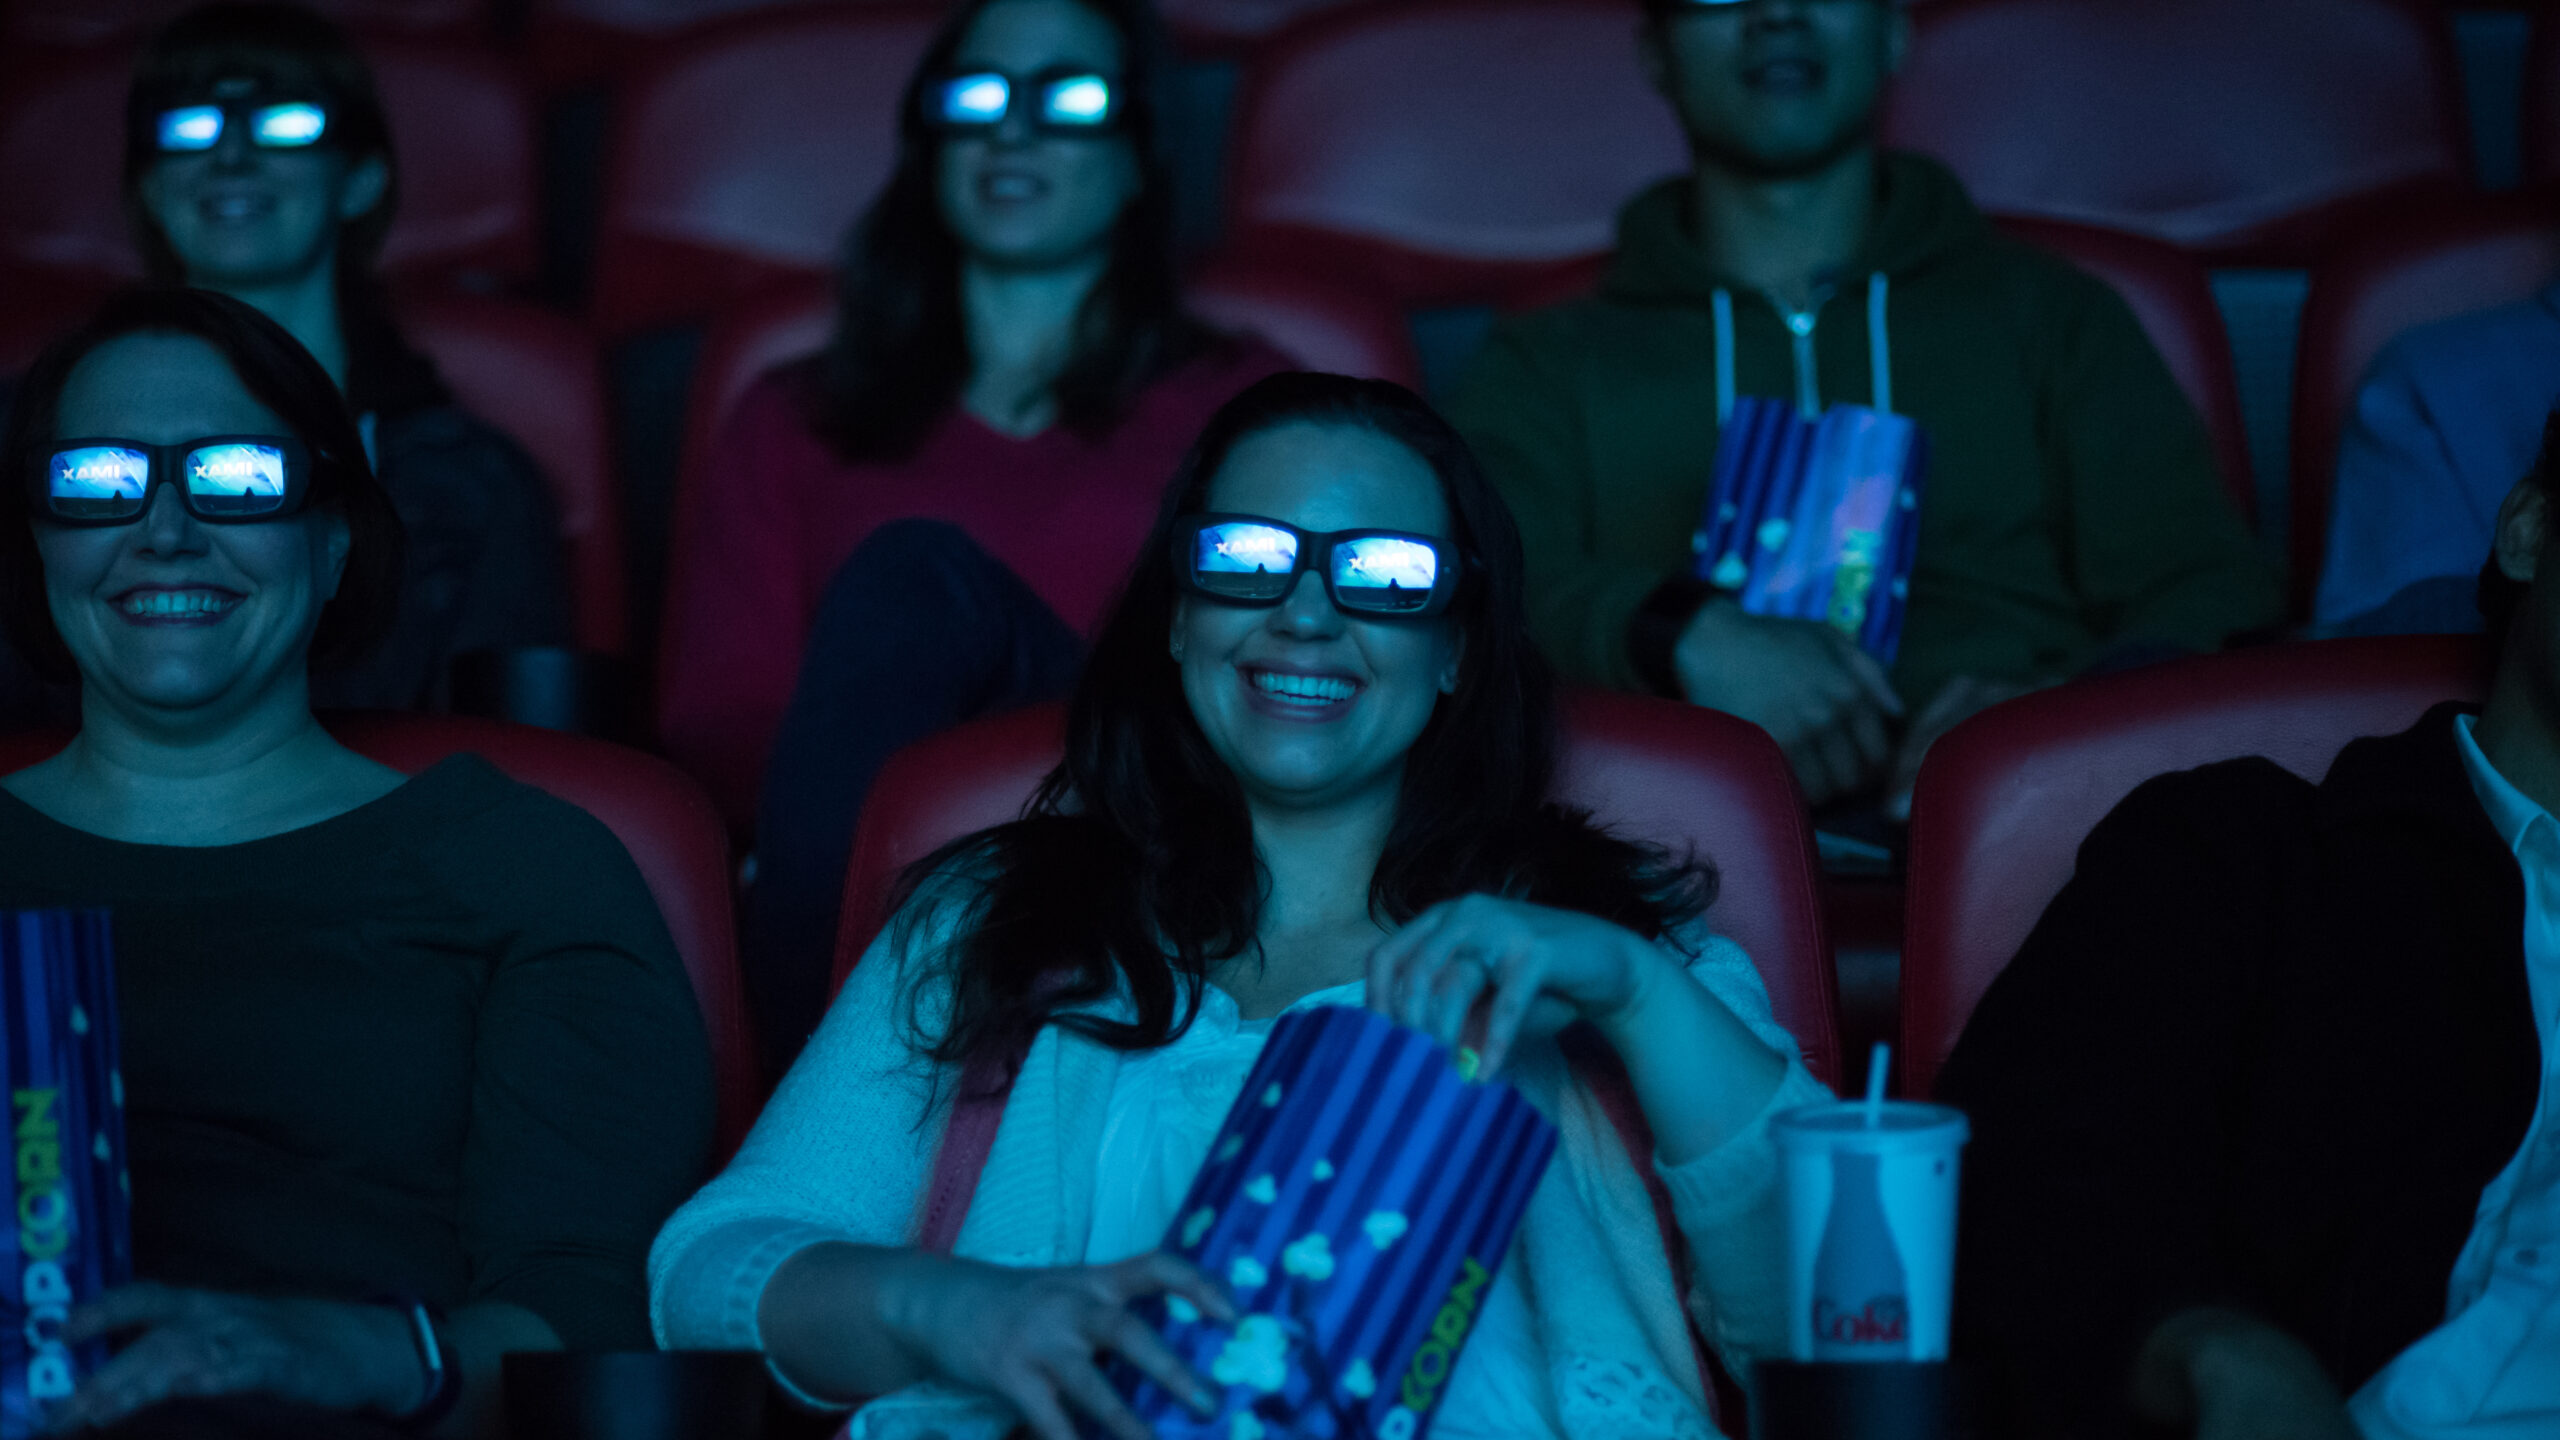 People wearing 3D glasses in a theater